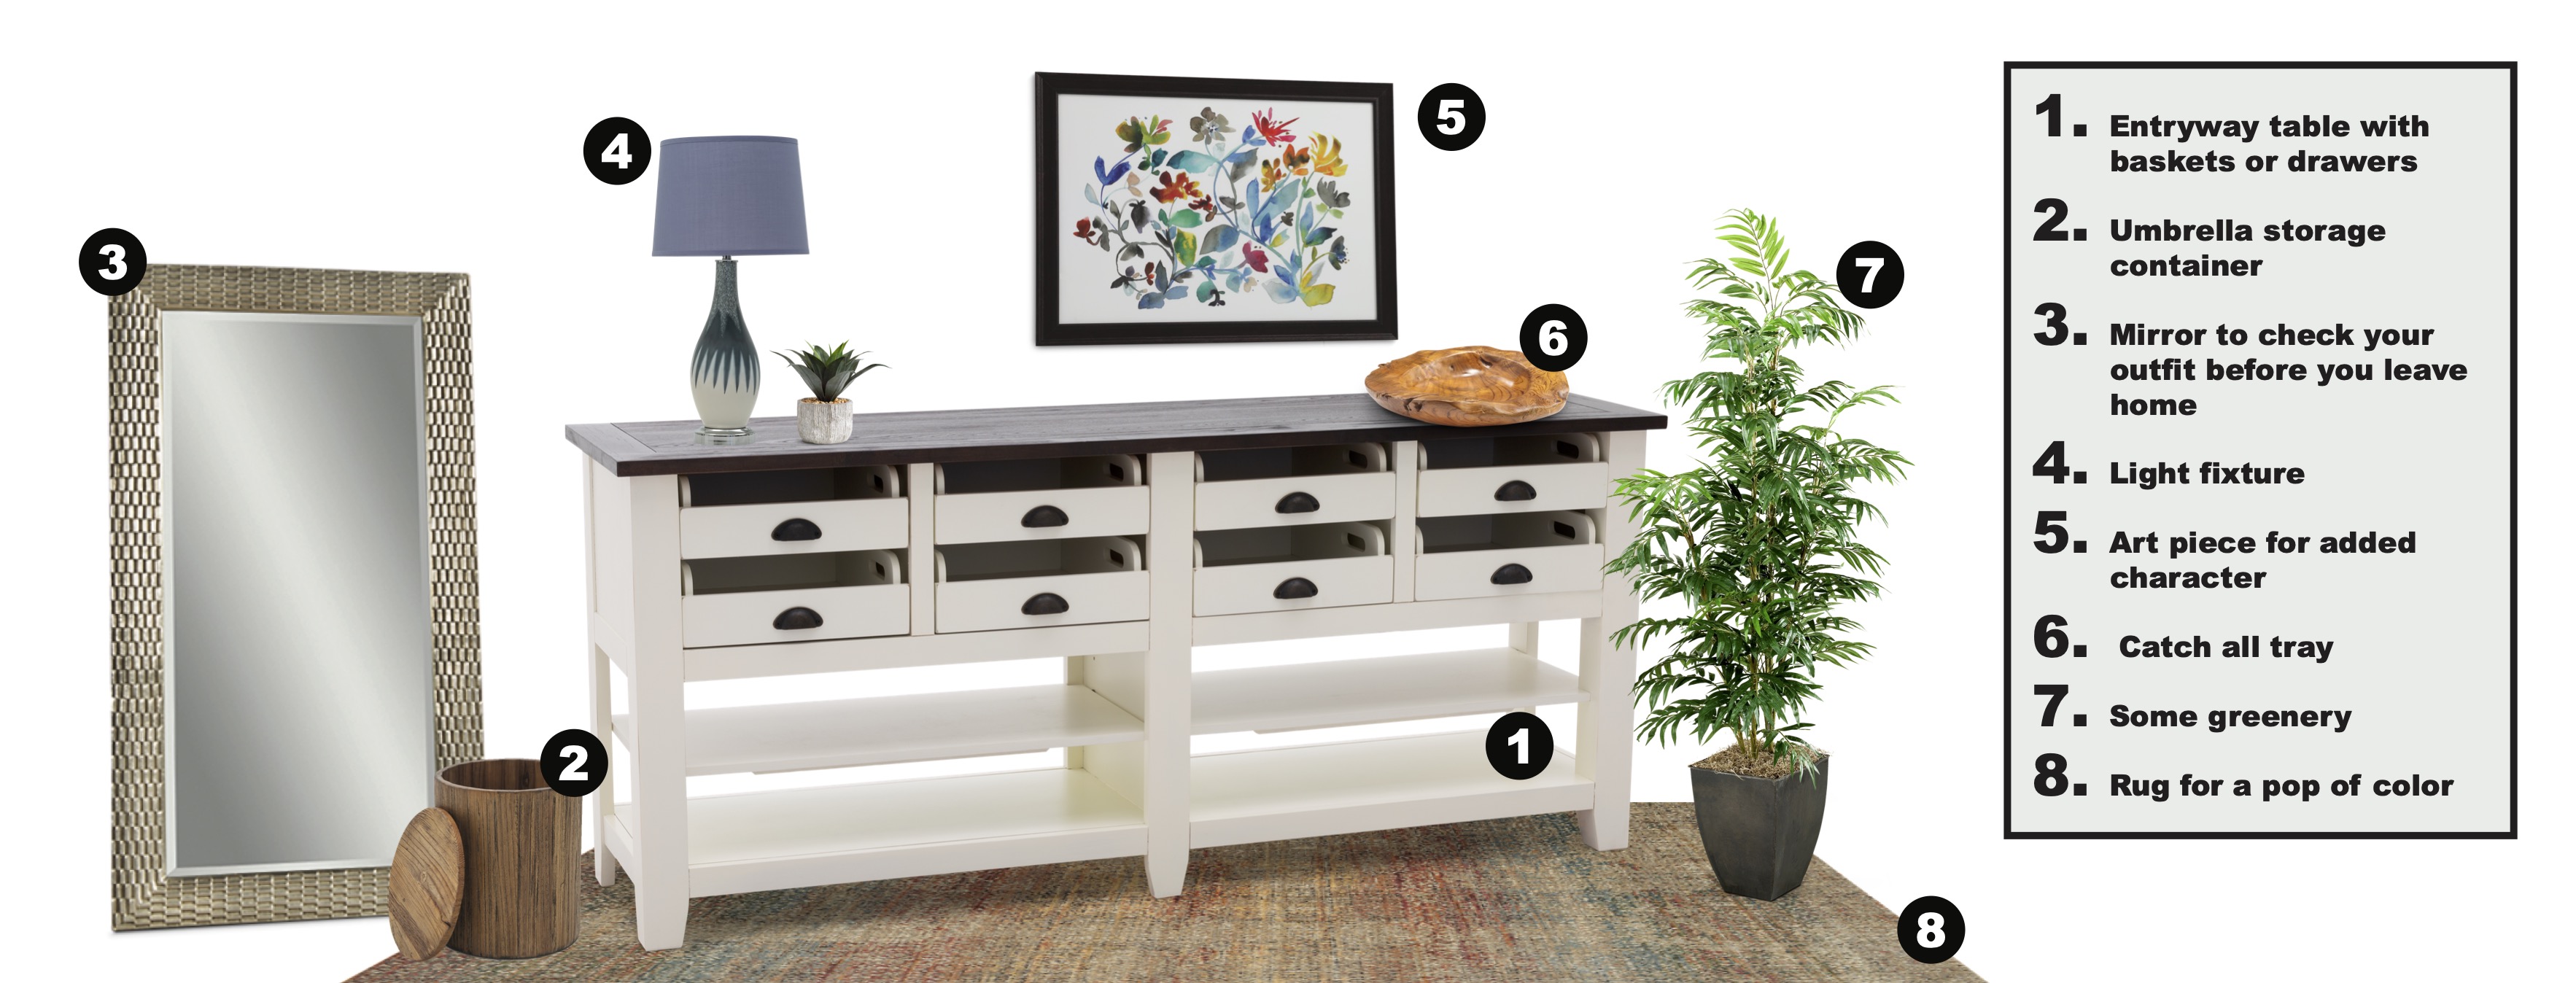 1. Entryway Table with Baskets and Drawers. 2. Umbrella Storage Container. 3. Mirror to check your outfit before you leave home. 4. Light fixture. 5.Art piece for added character. 6. Catch all tray.  7. Some Greenery 8. Rug for a pop of color.